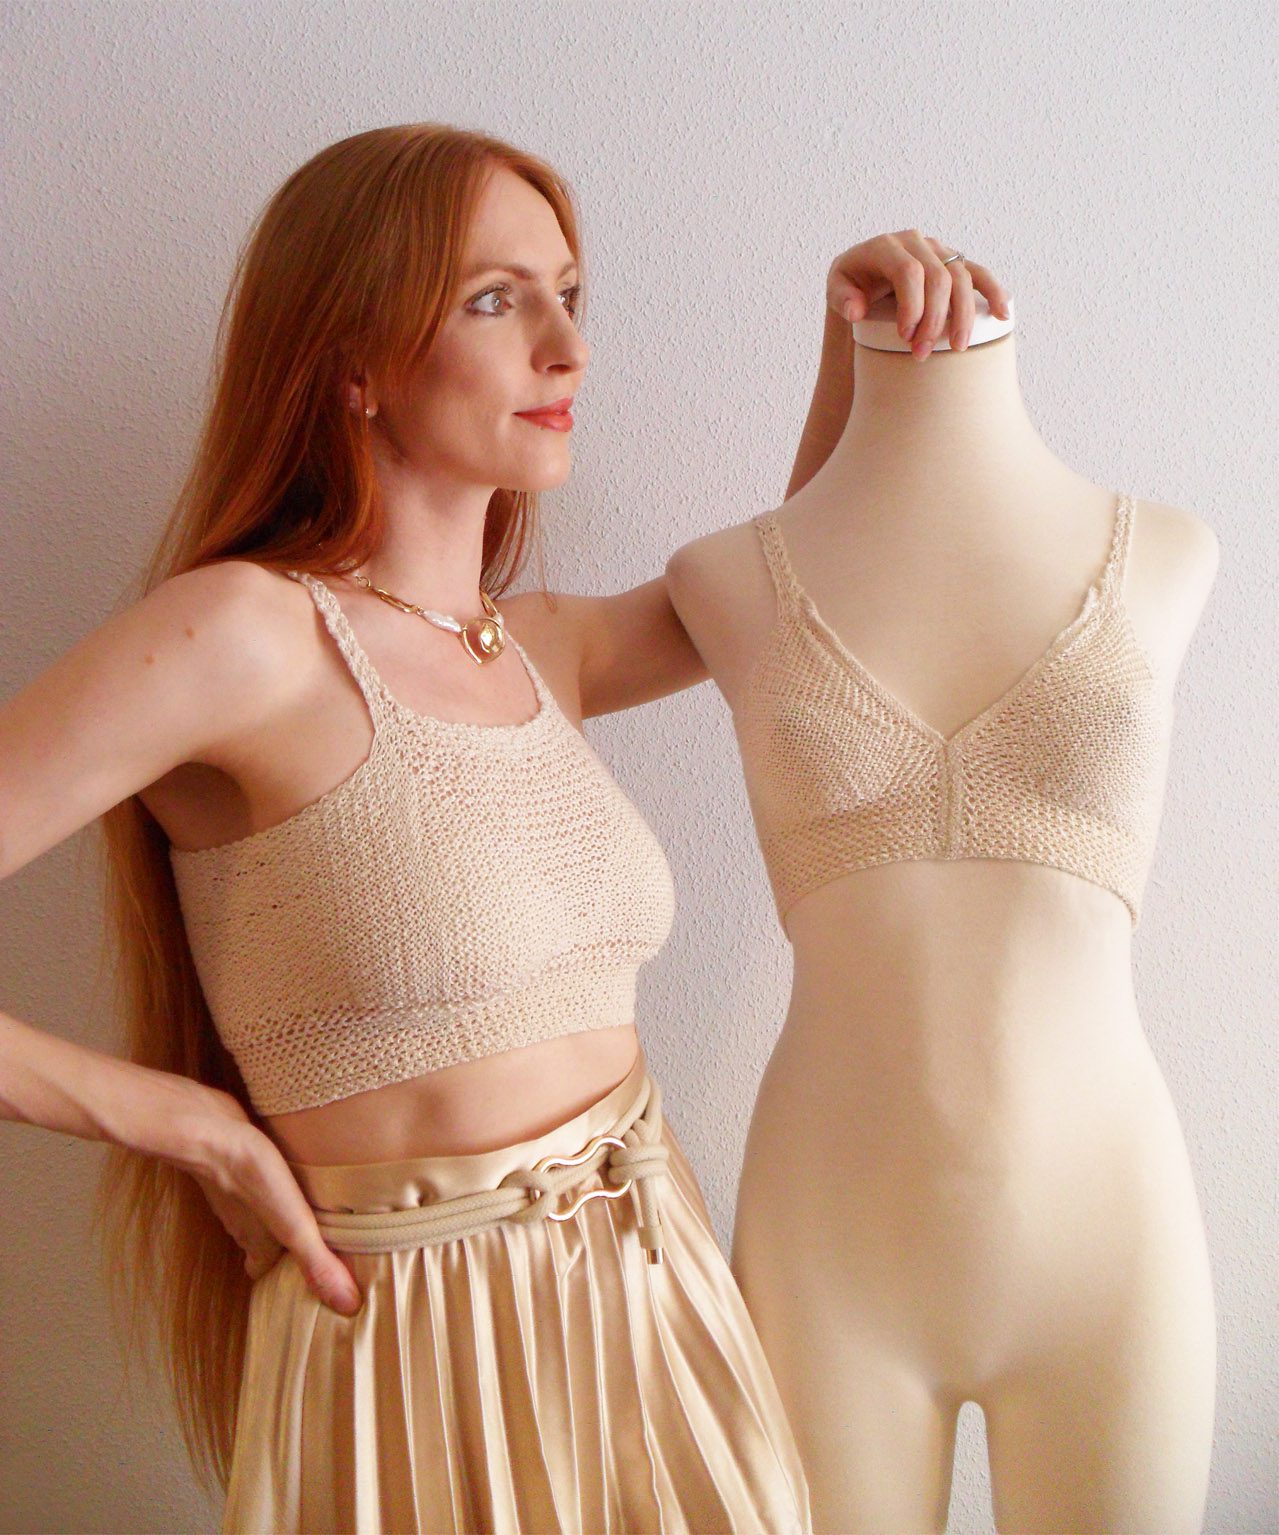 Wool or cotton bralette with vintage style lace